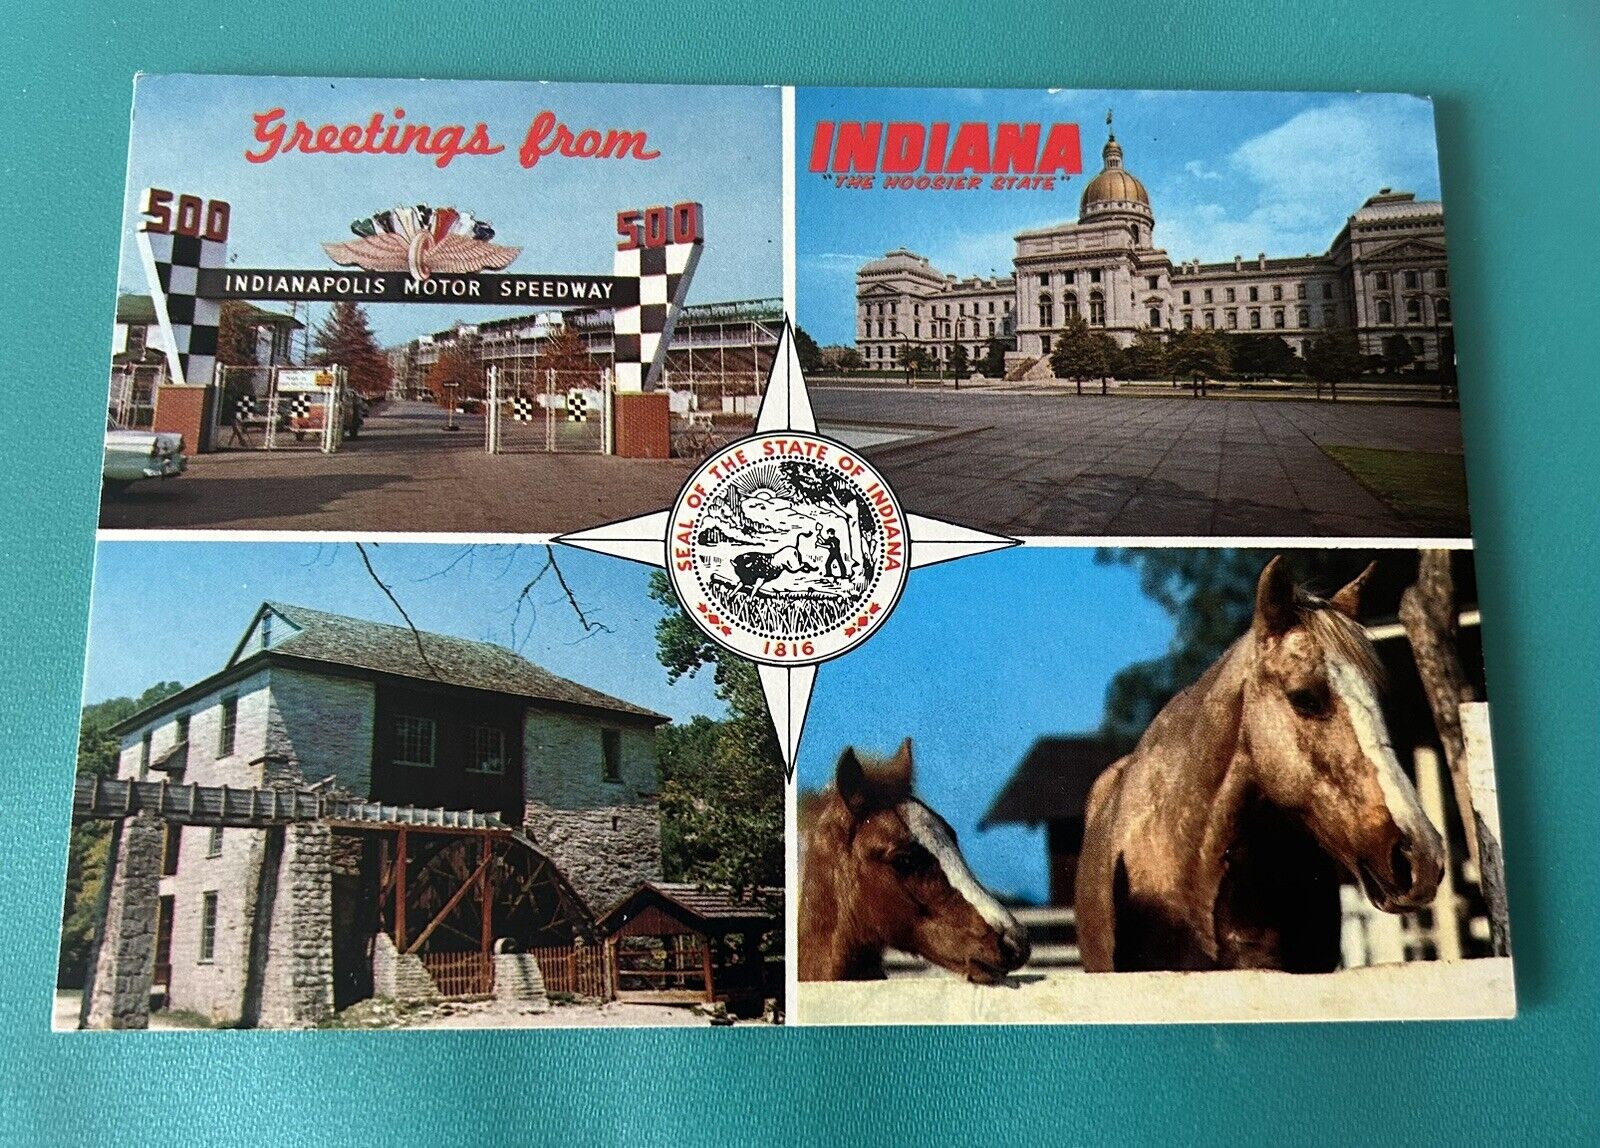 Greetings From Indiana Post Card